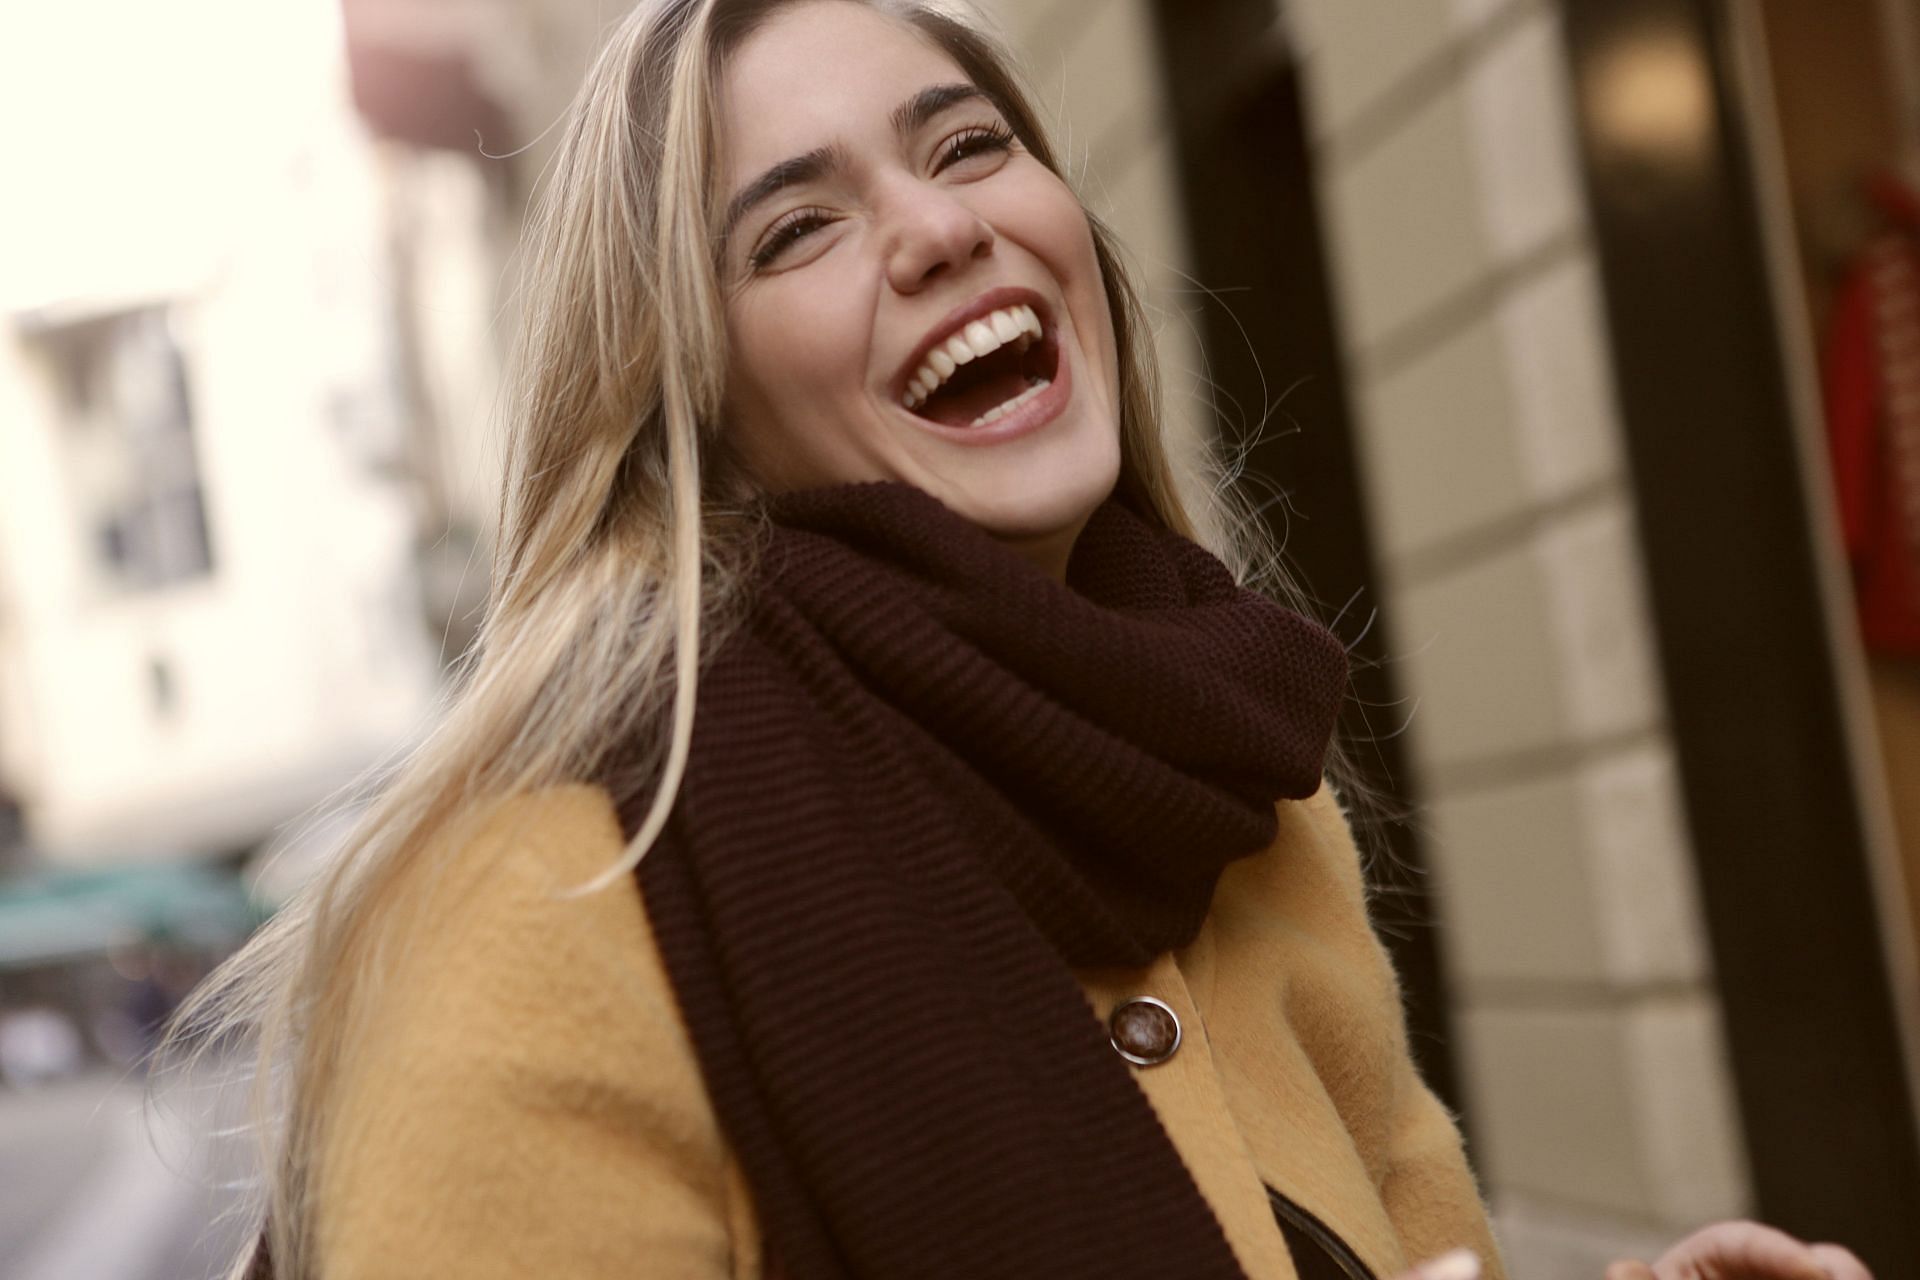 Laughter a day keeps the doctor away. (Image via Pexels/ Andrea Piacquadio)